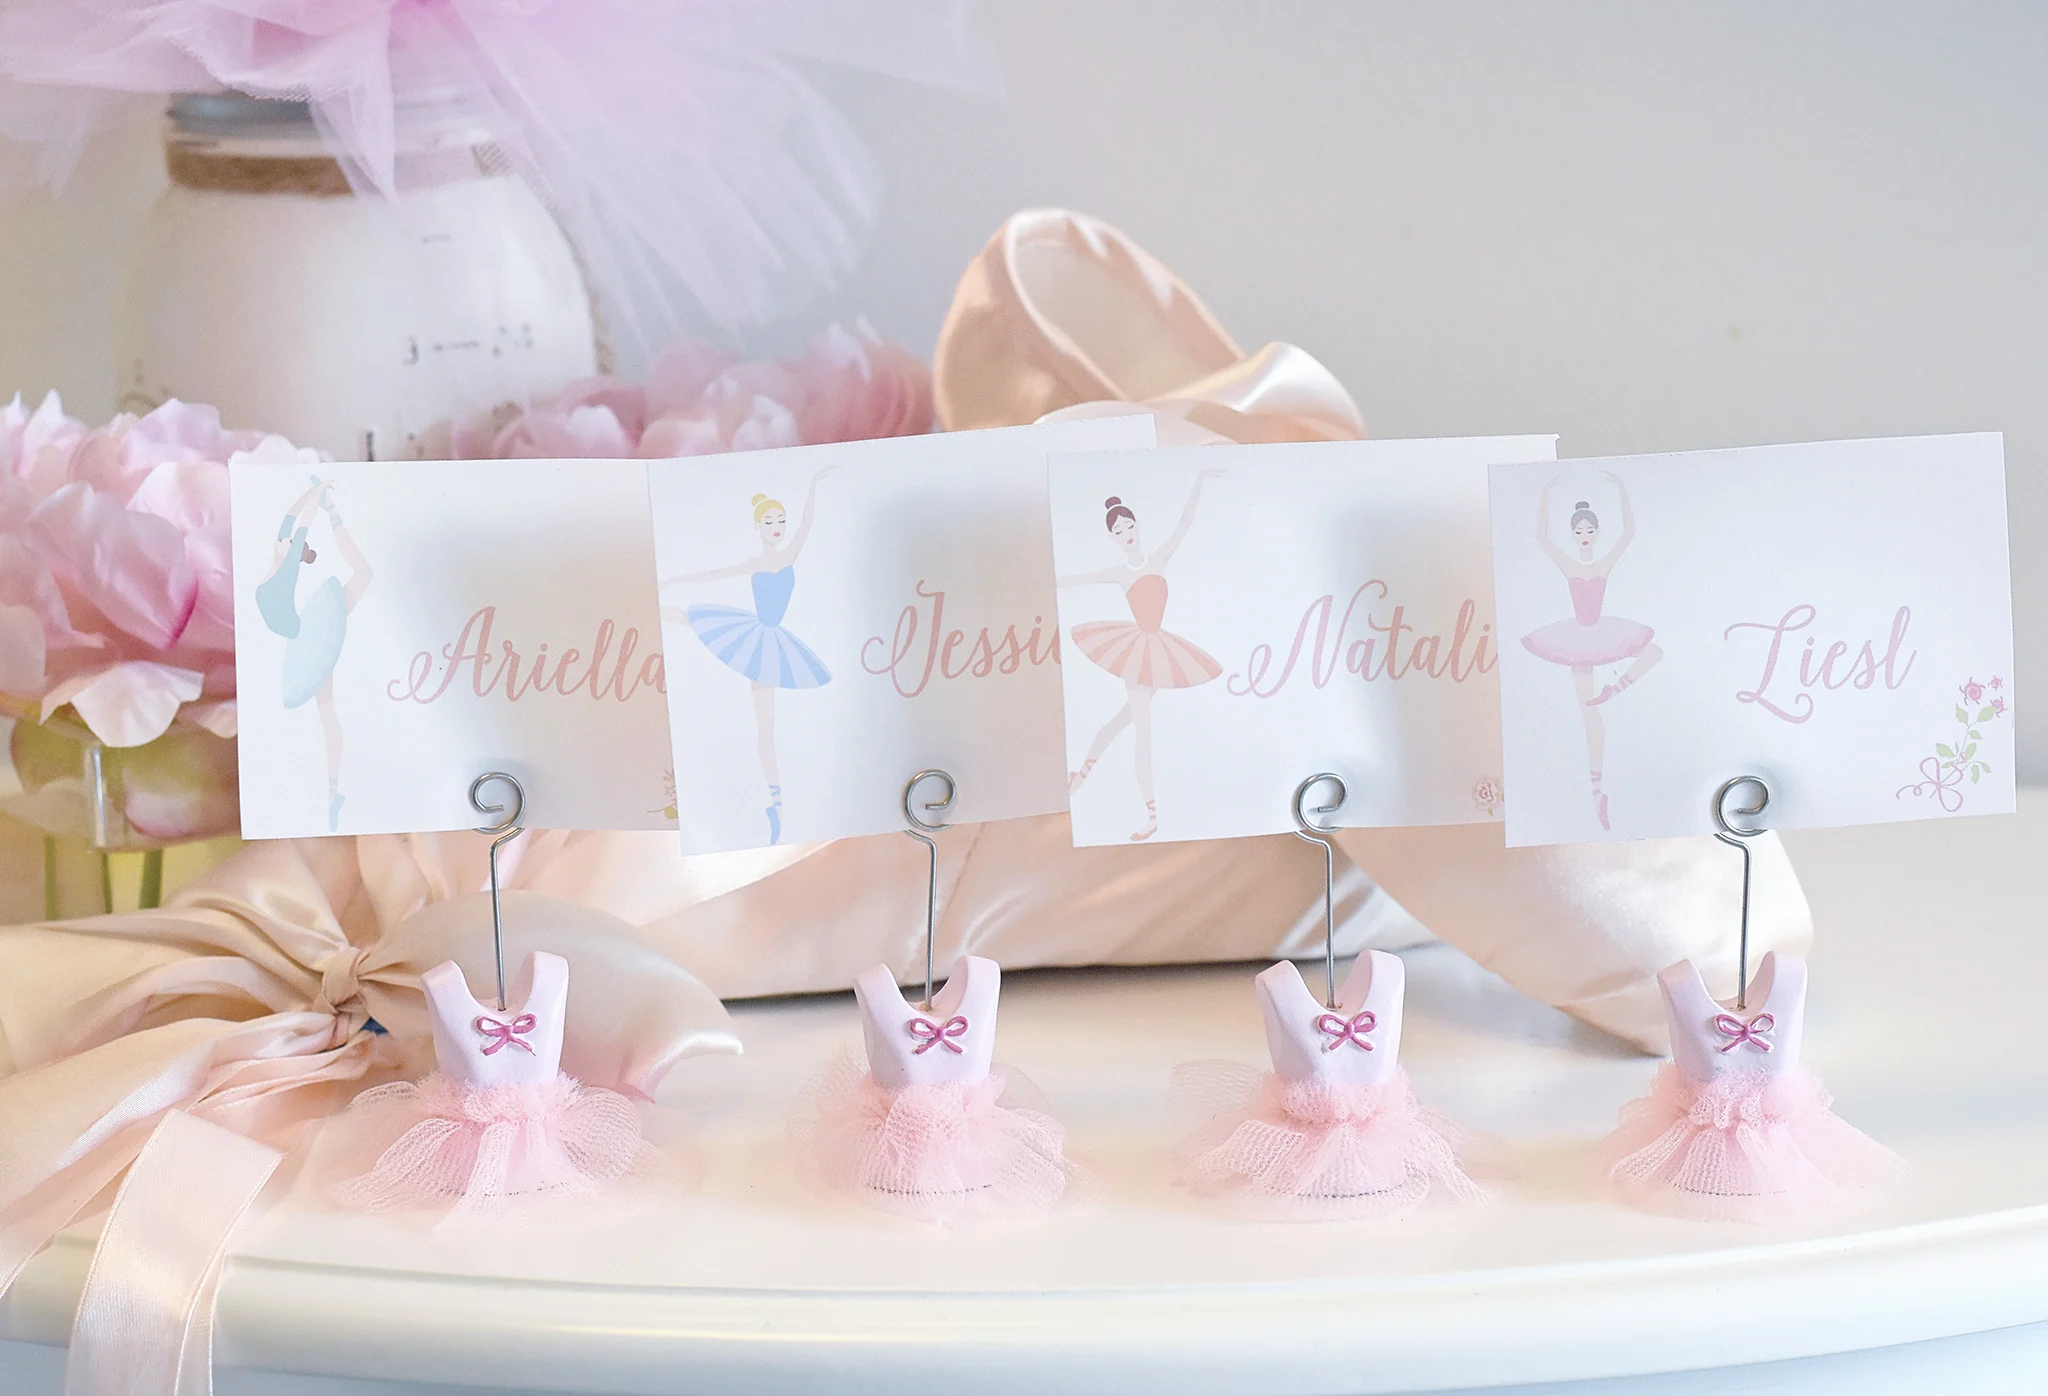 Printable place card and food name cards for your little ballerinas!